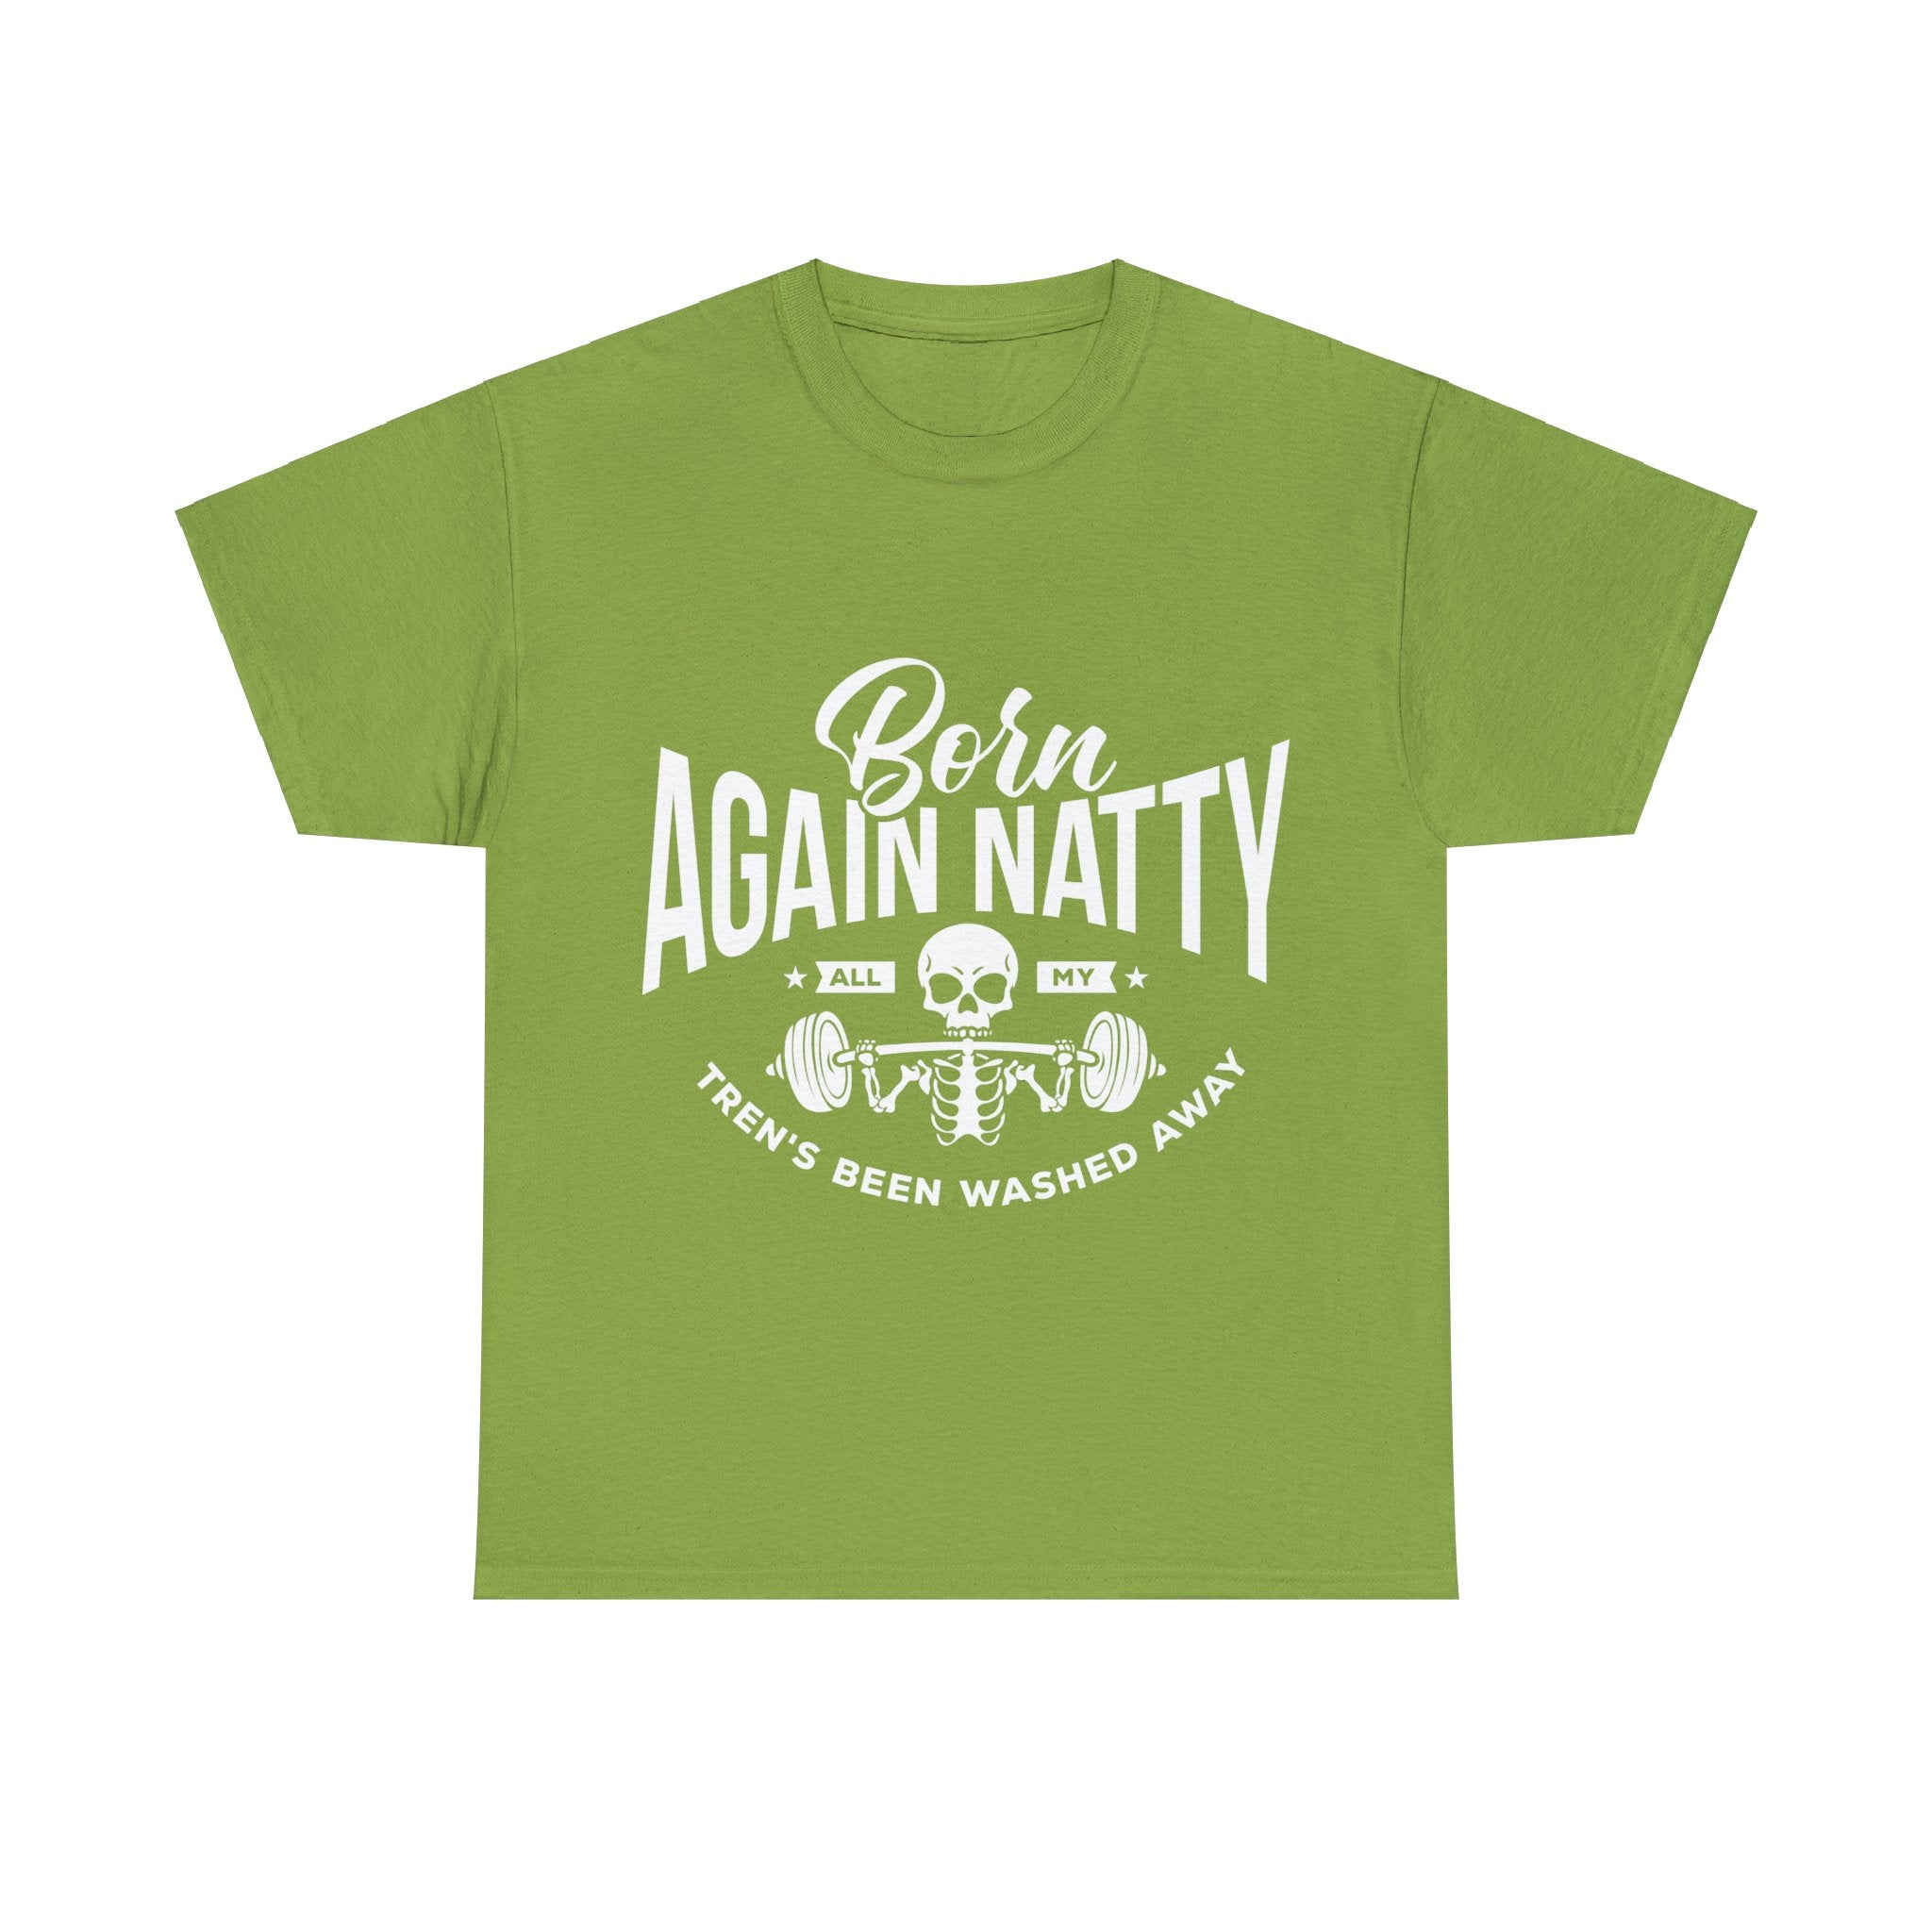 Born Again Natty - All My Tren's Been Washed Away  Unisex Heavy Cotton Tee